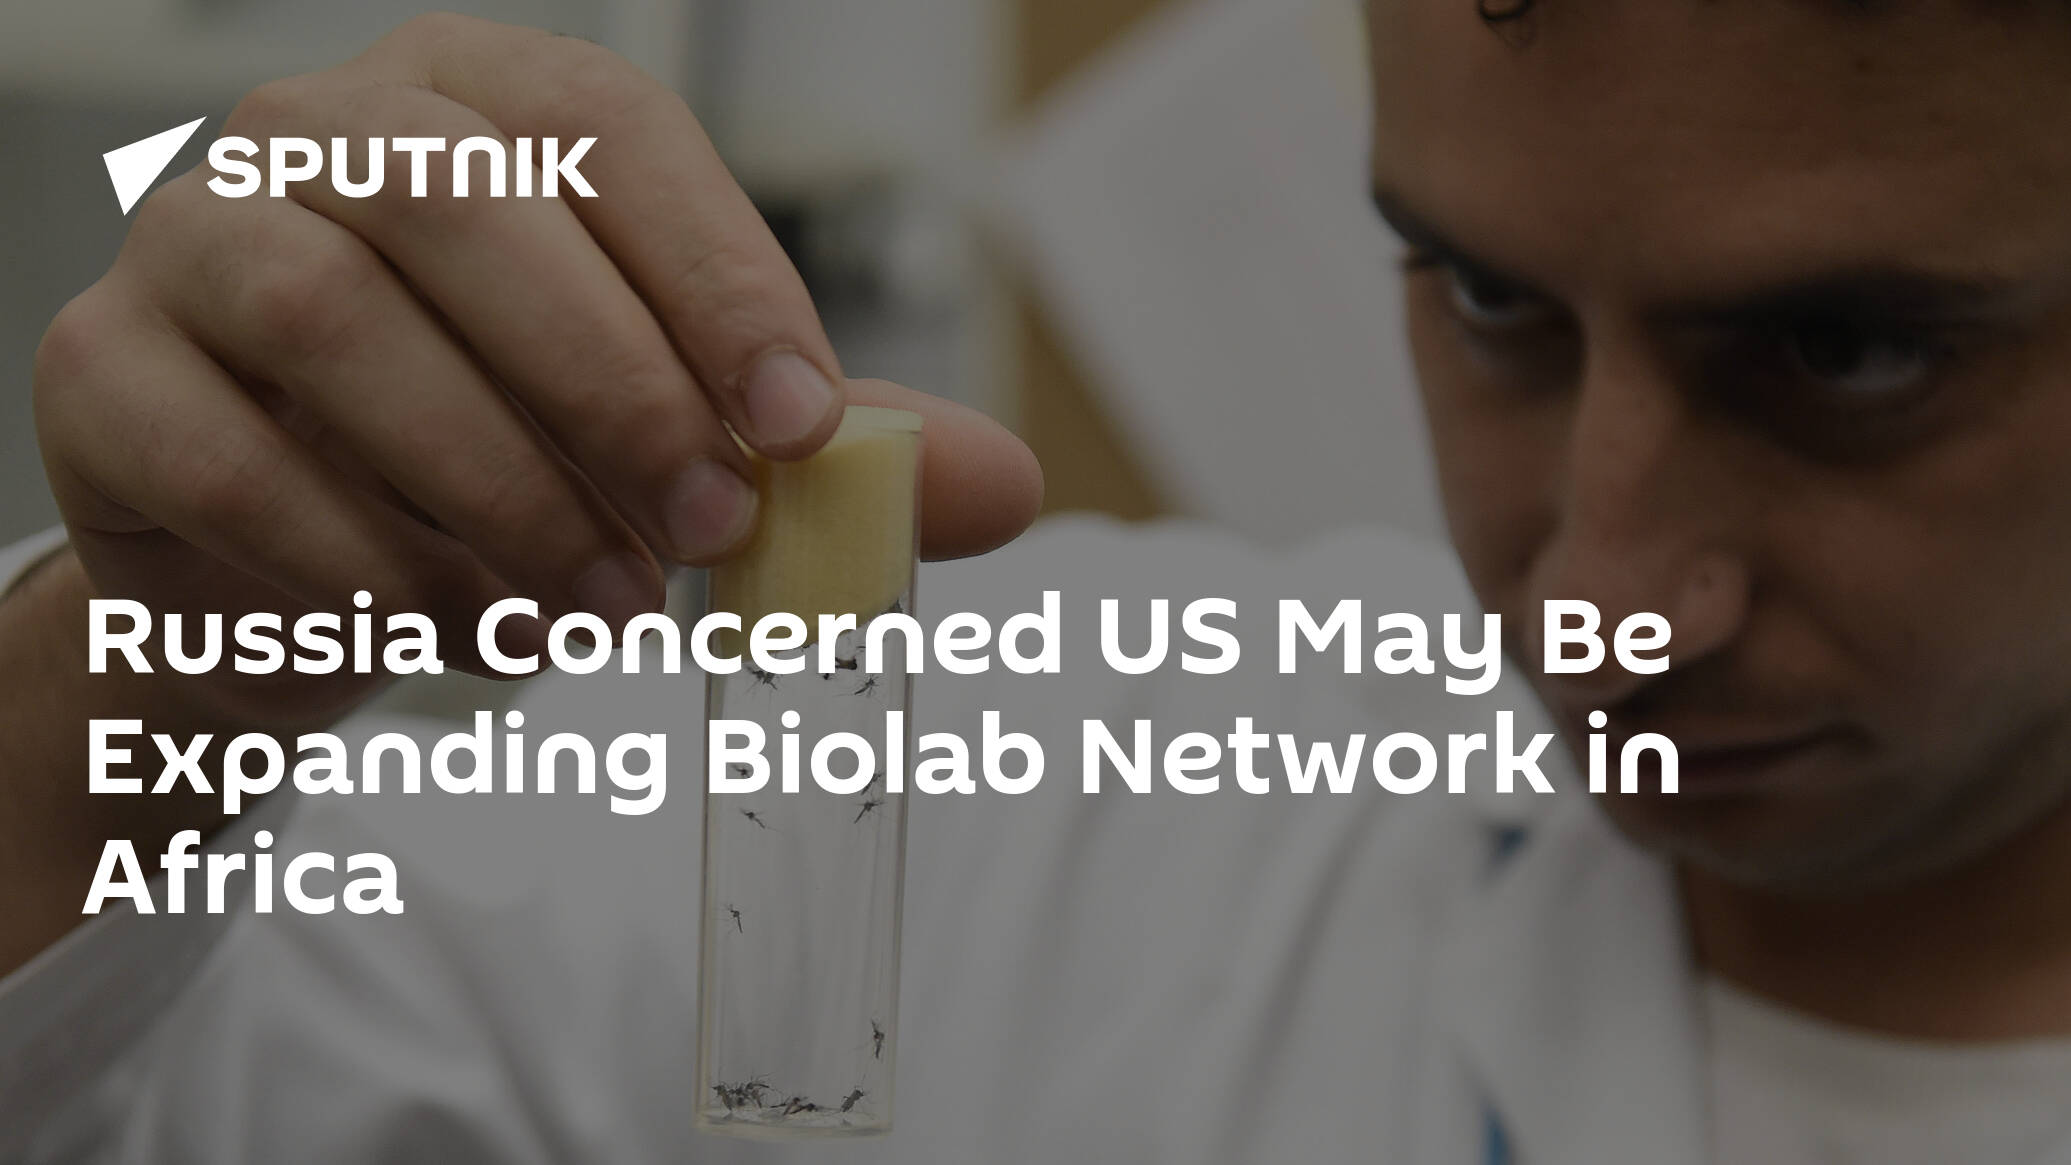 Russia Concerned US May Be Expanding Biolab Network in Africa